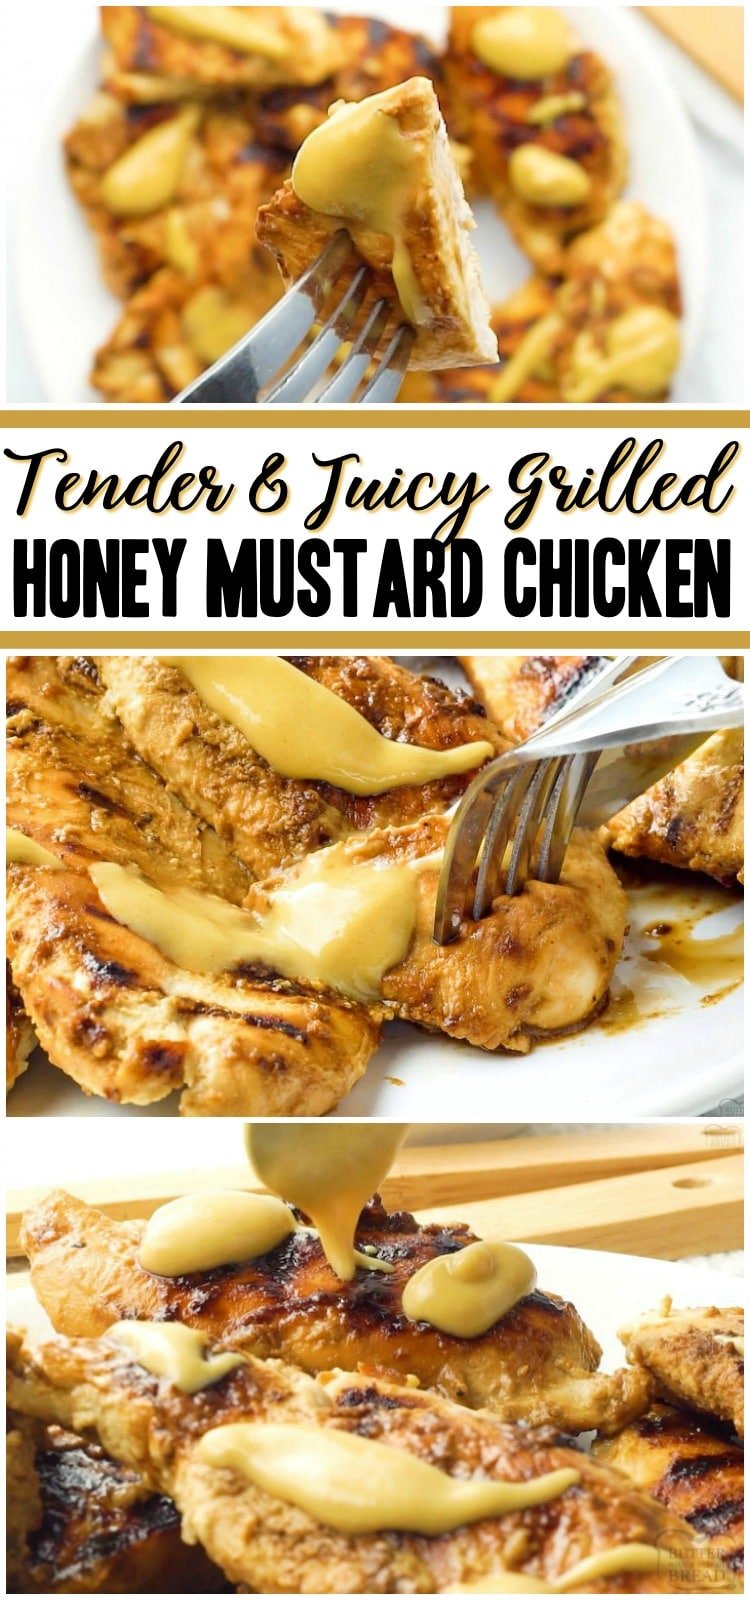 Grilled Honey Mustard Chicken recipe with a simple 4 ingredient sauce that's incredible! Yields perfectly grilled, tender, juicy chicken with amazing flavor. #chicken #grilled #honey #mustard #dinner #recipe from BUTTER WITH A SIDE OF BREAD